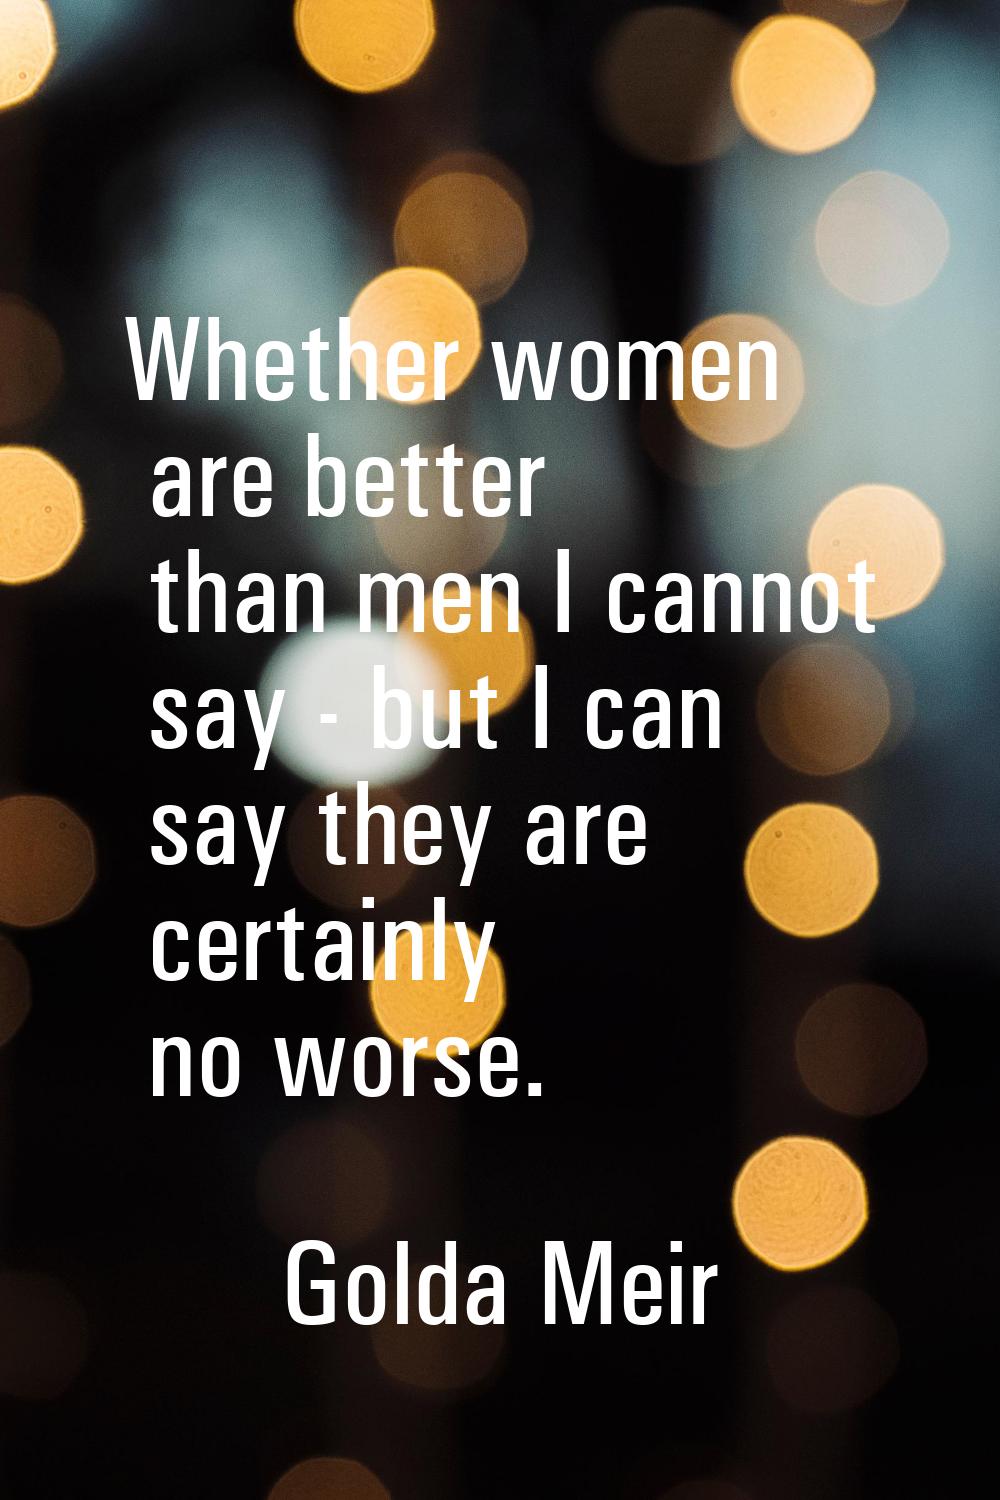 Whether women are better than men I cannot say - but I can say they are certainly no worse.